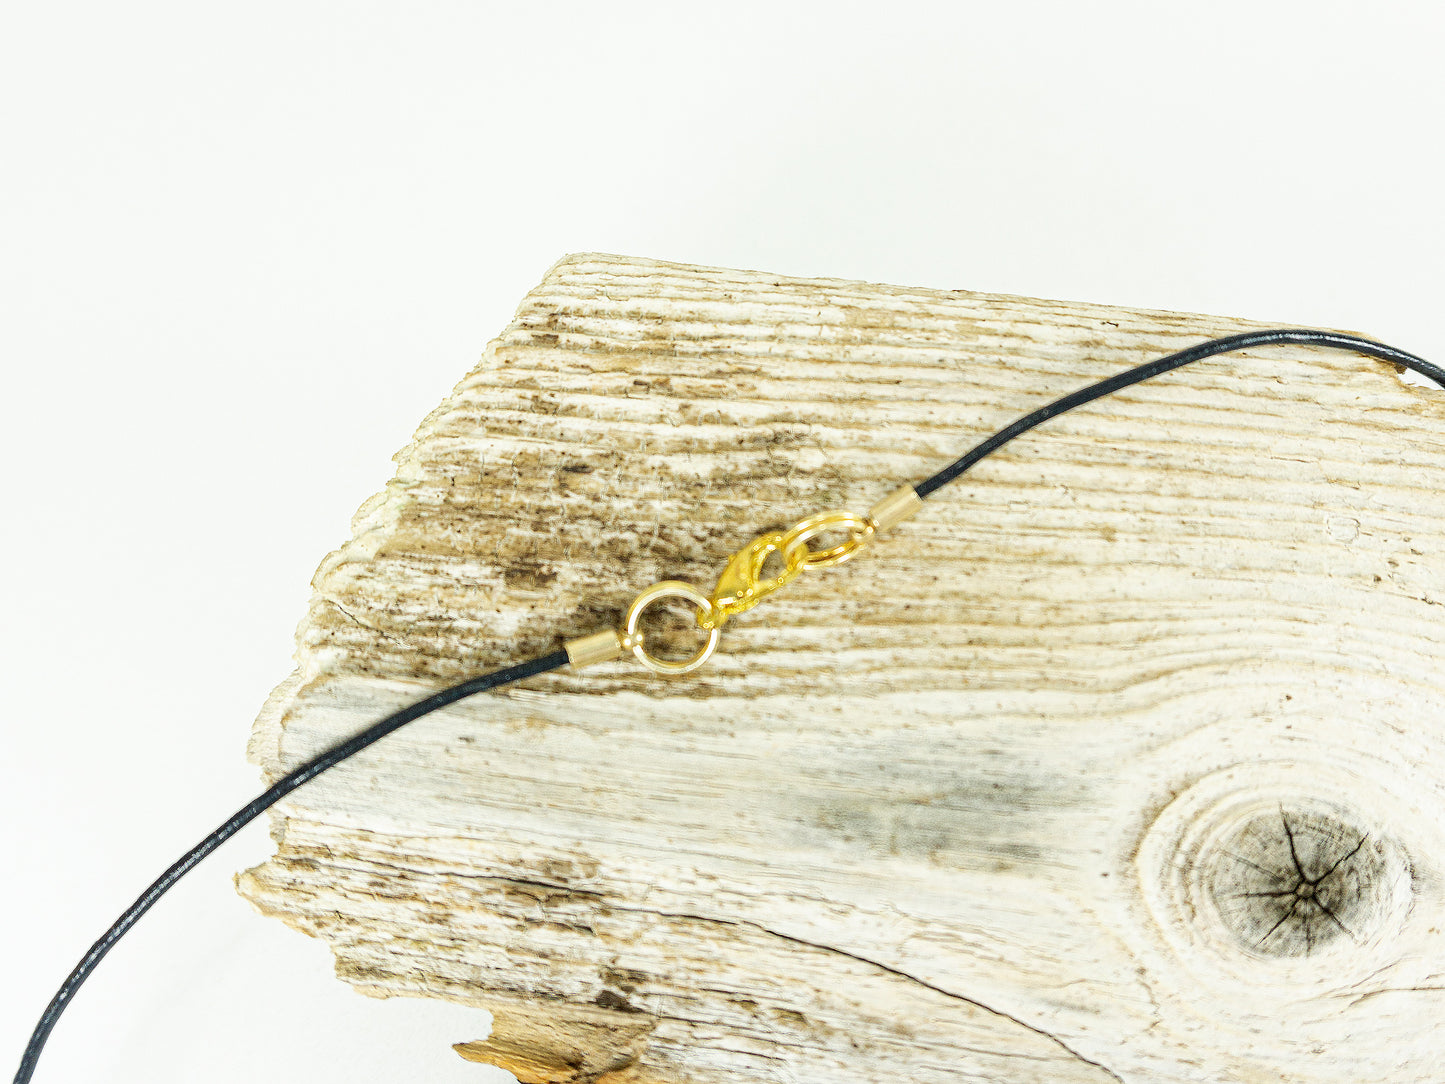 Handmade DRIFTWOOD NECKLACE 'Seeland' with agate druse, sustainable jewelry